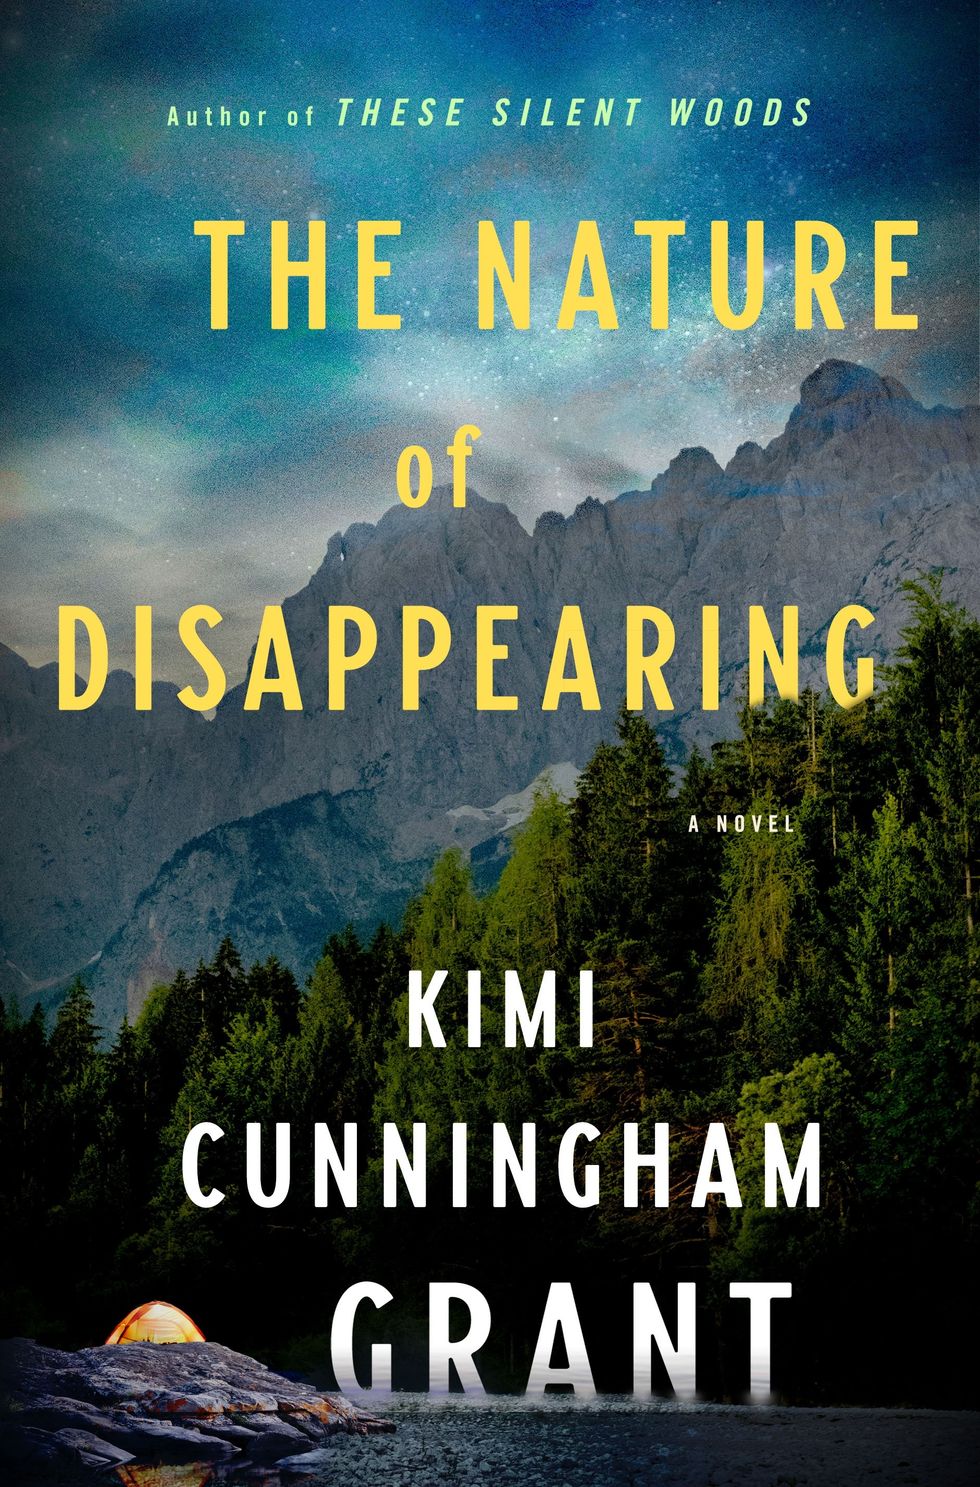 The Nature of Disappearing by Kimi Cunningham Grant